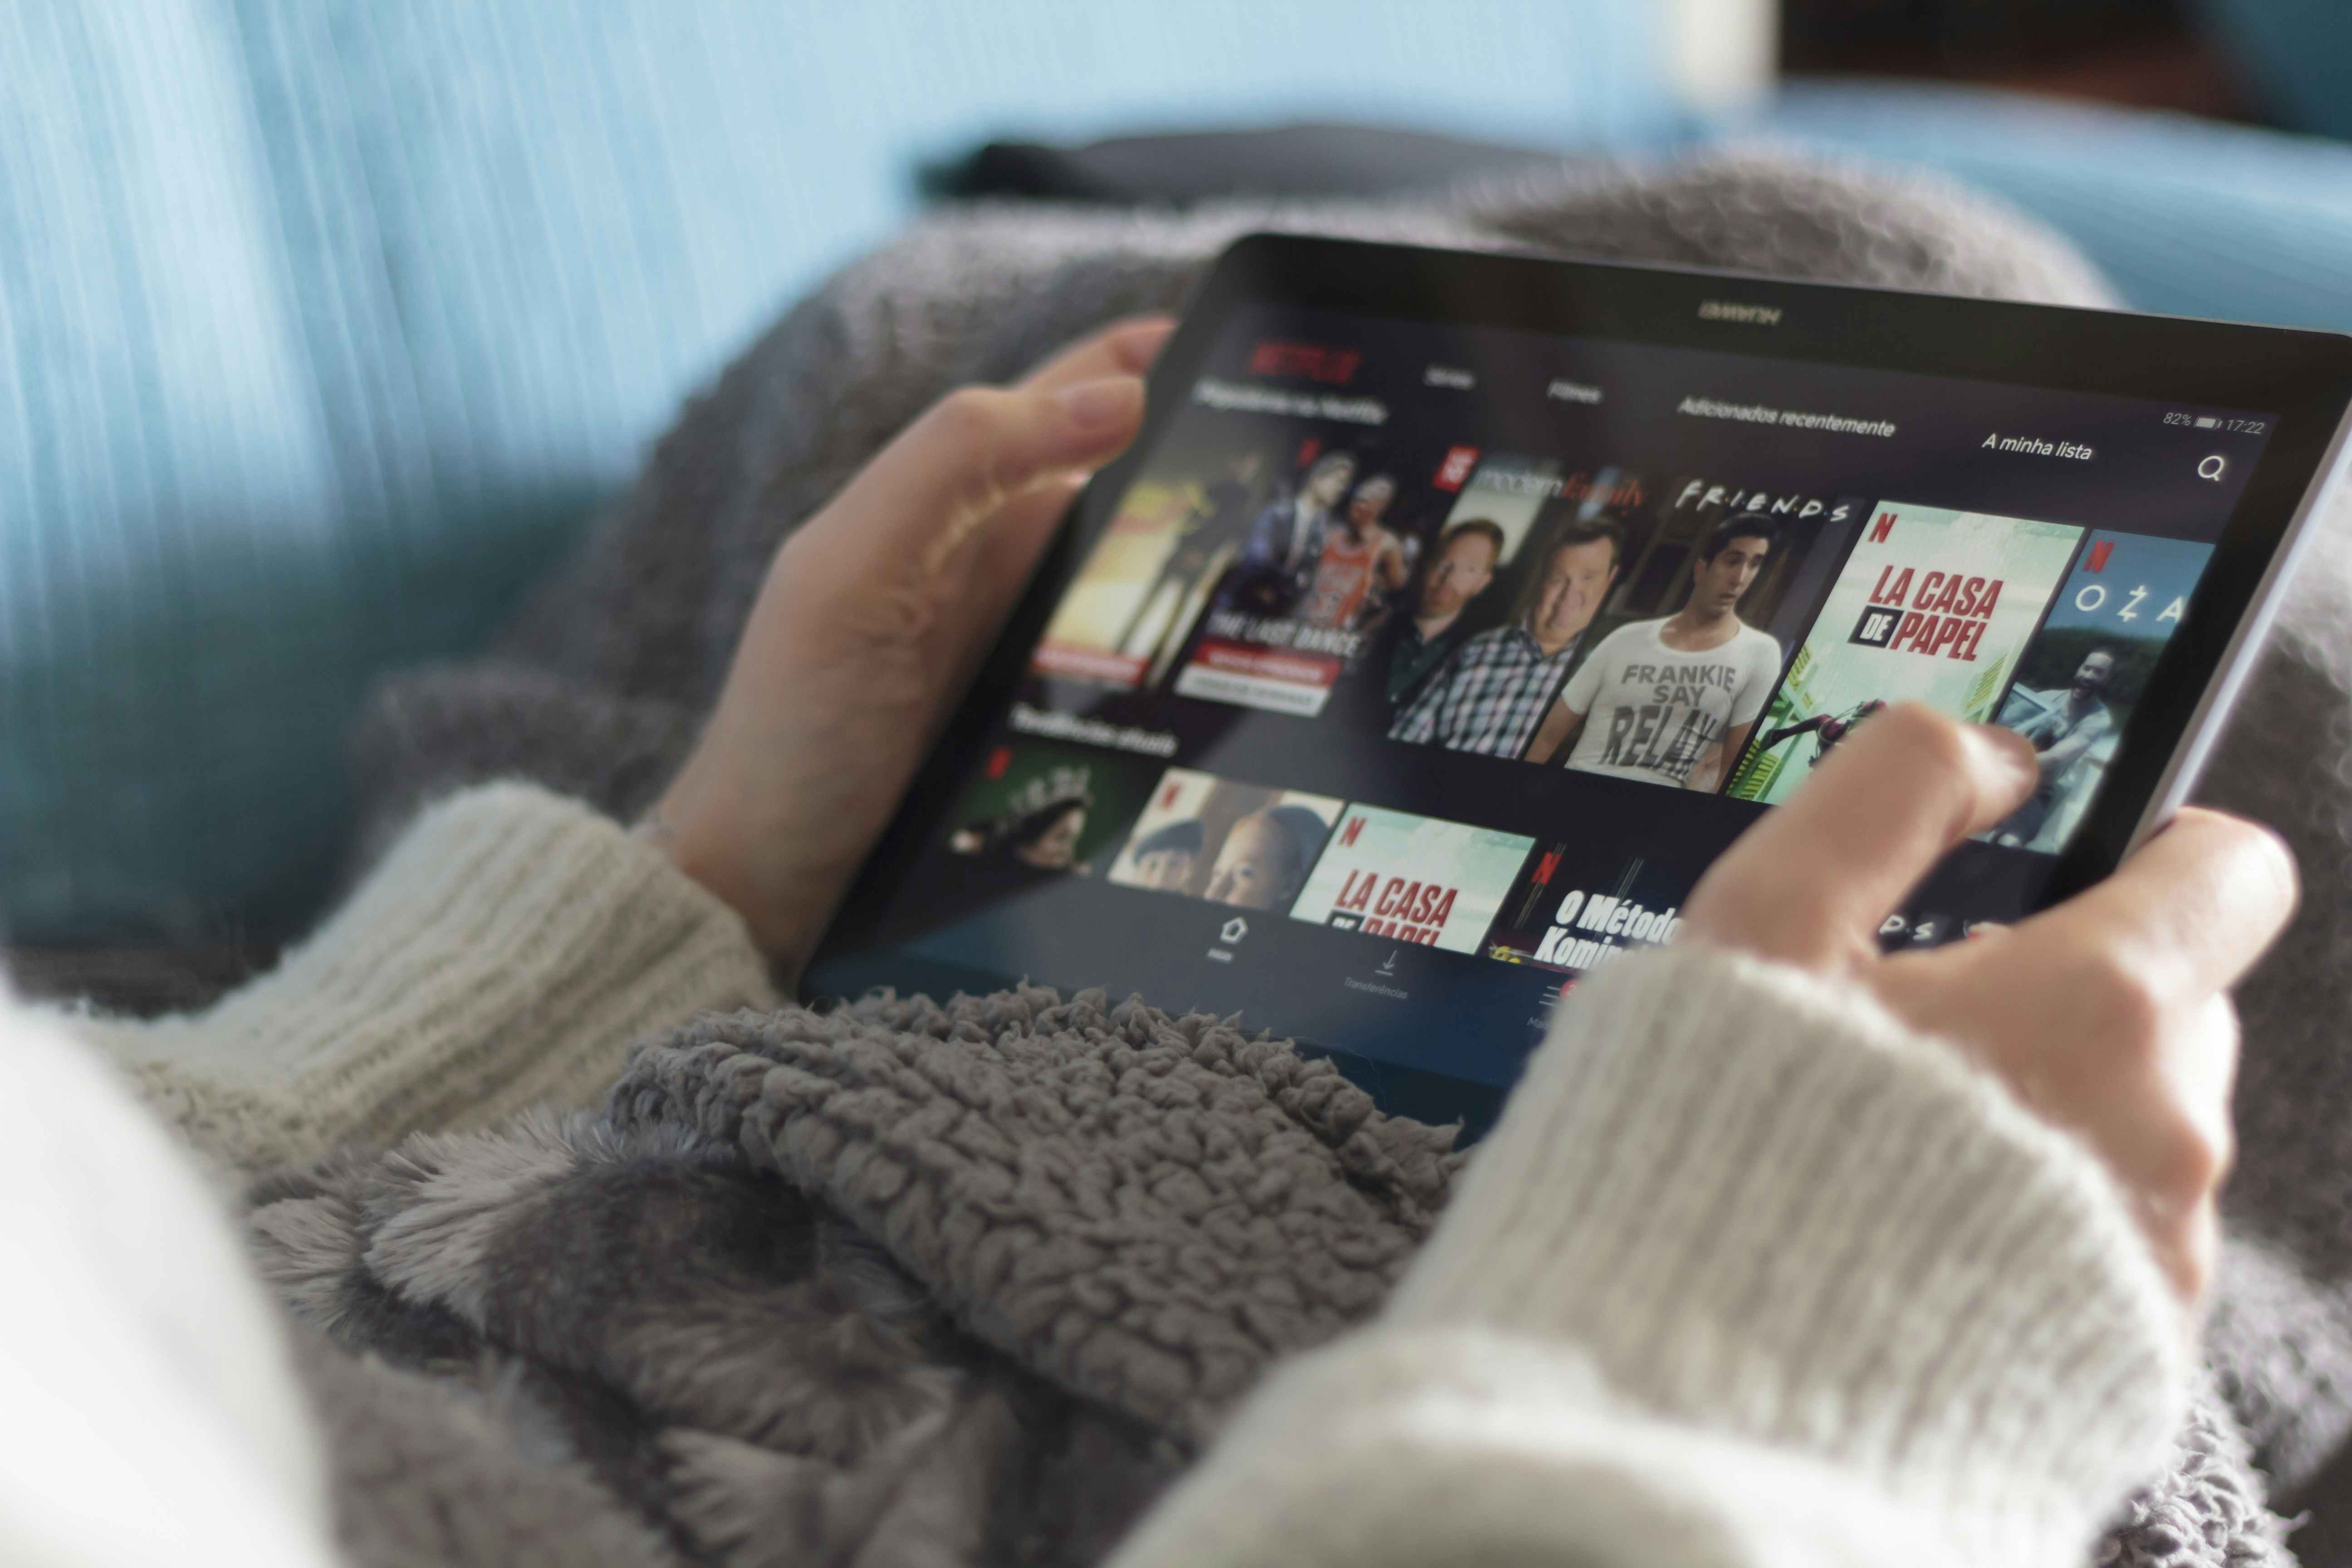 Netflix streaming service on a tablet